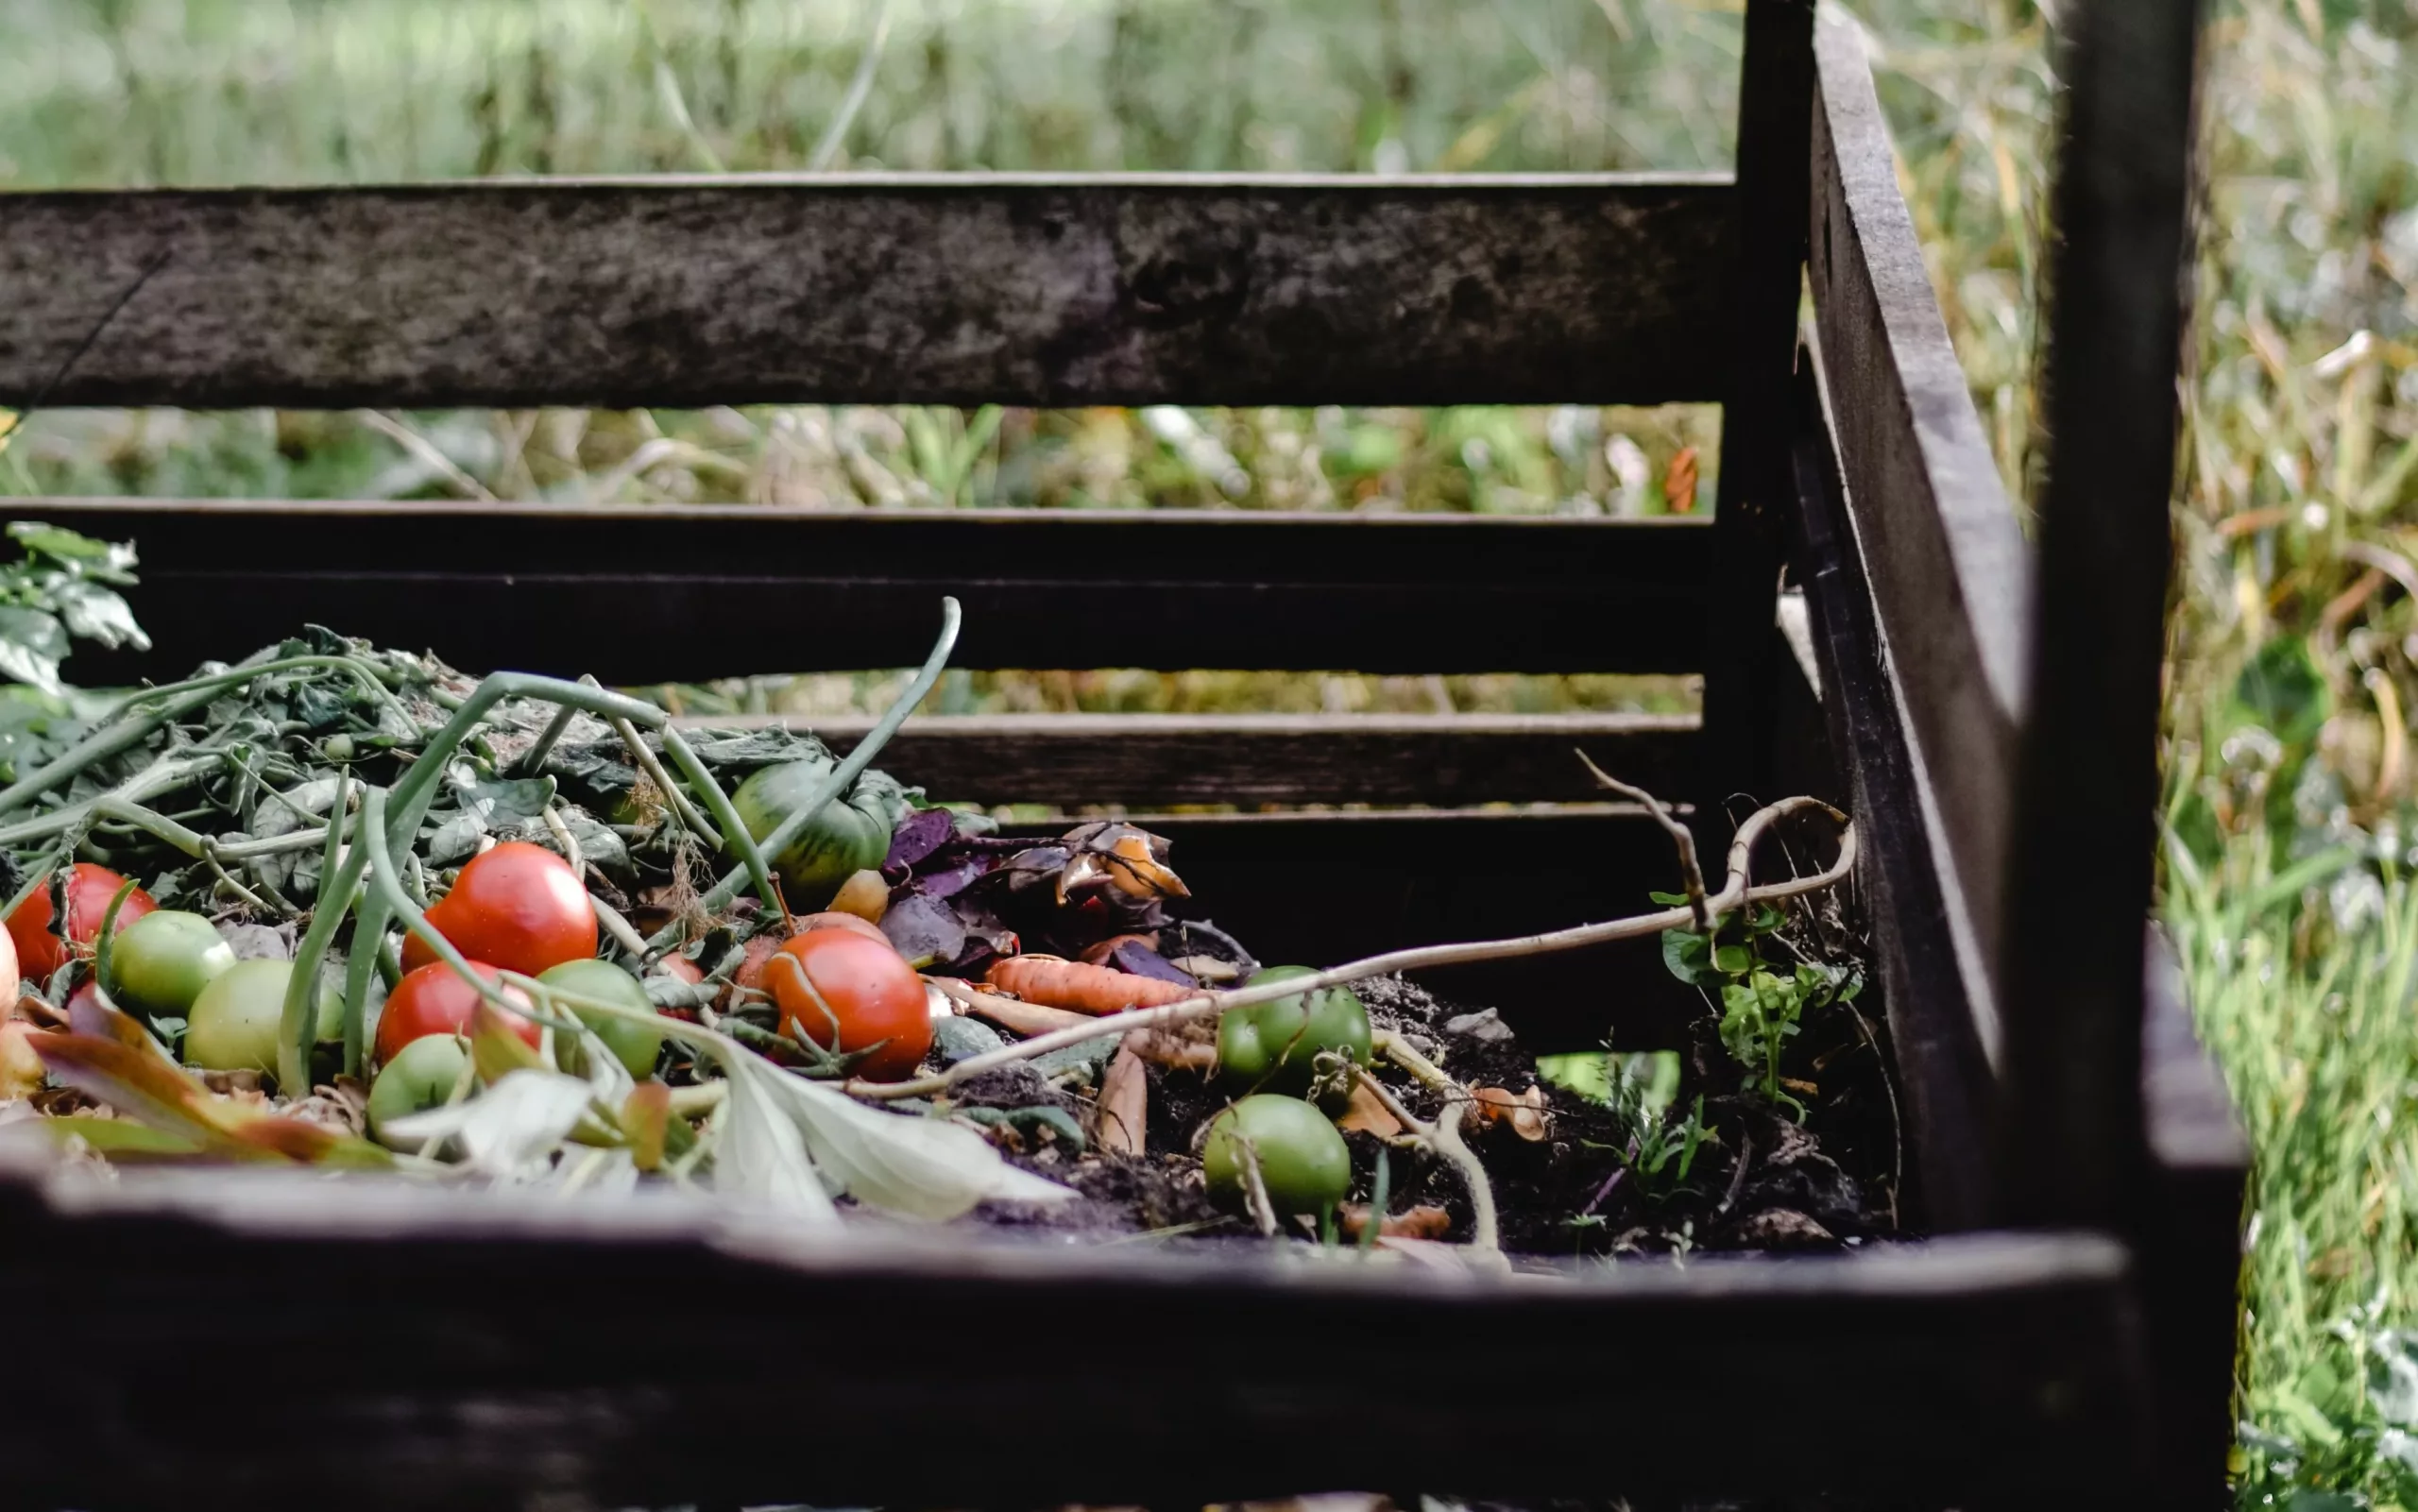 Donate Your Compost to Community Gardens